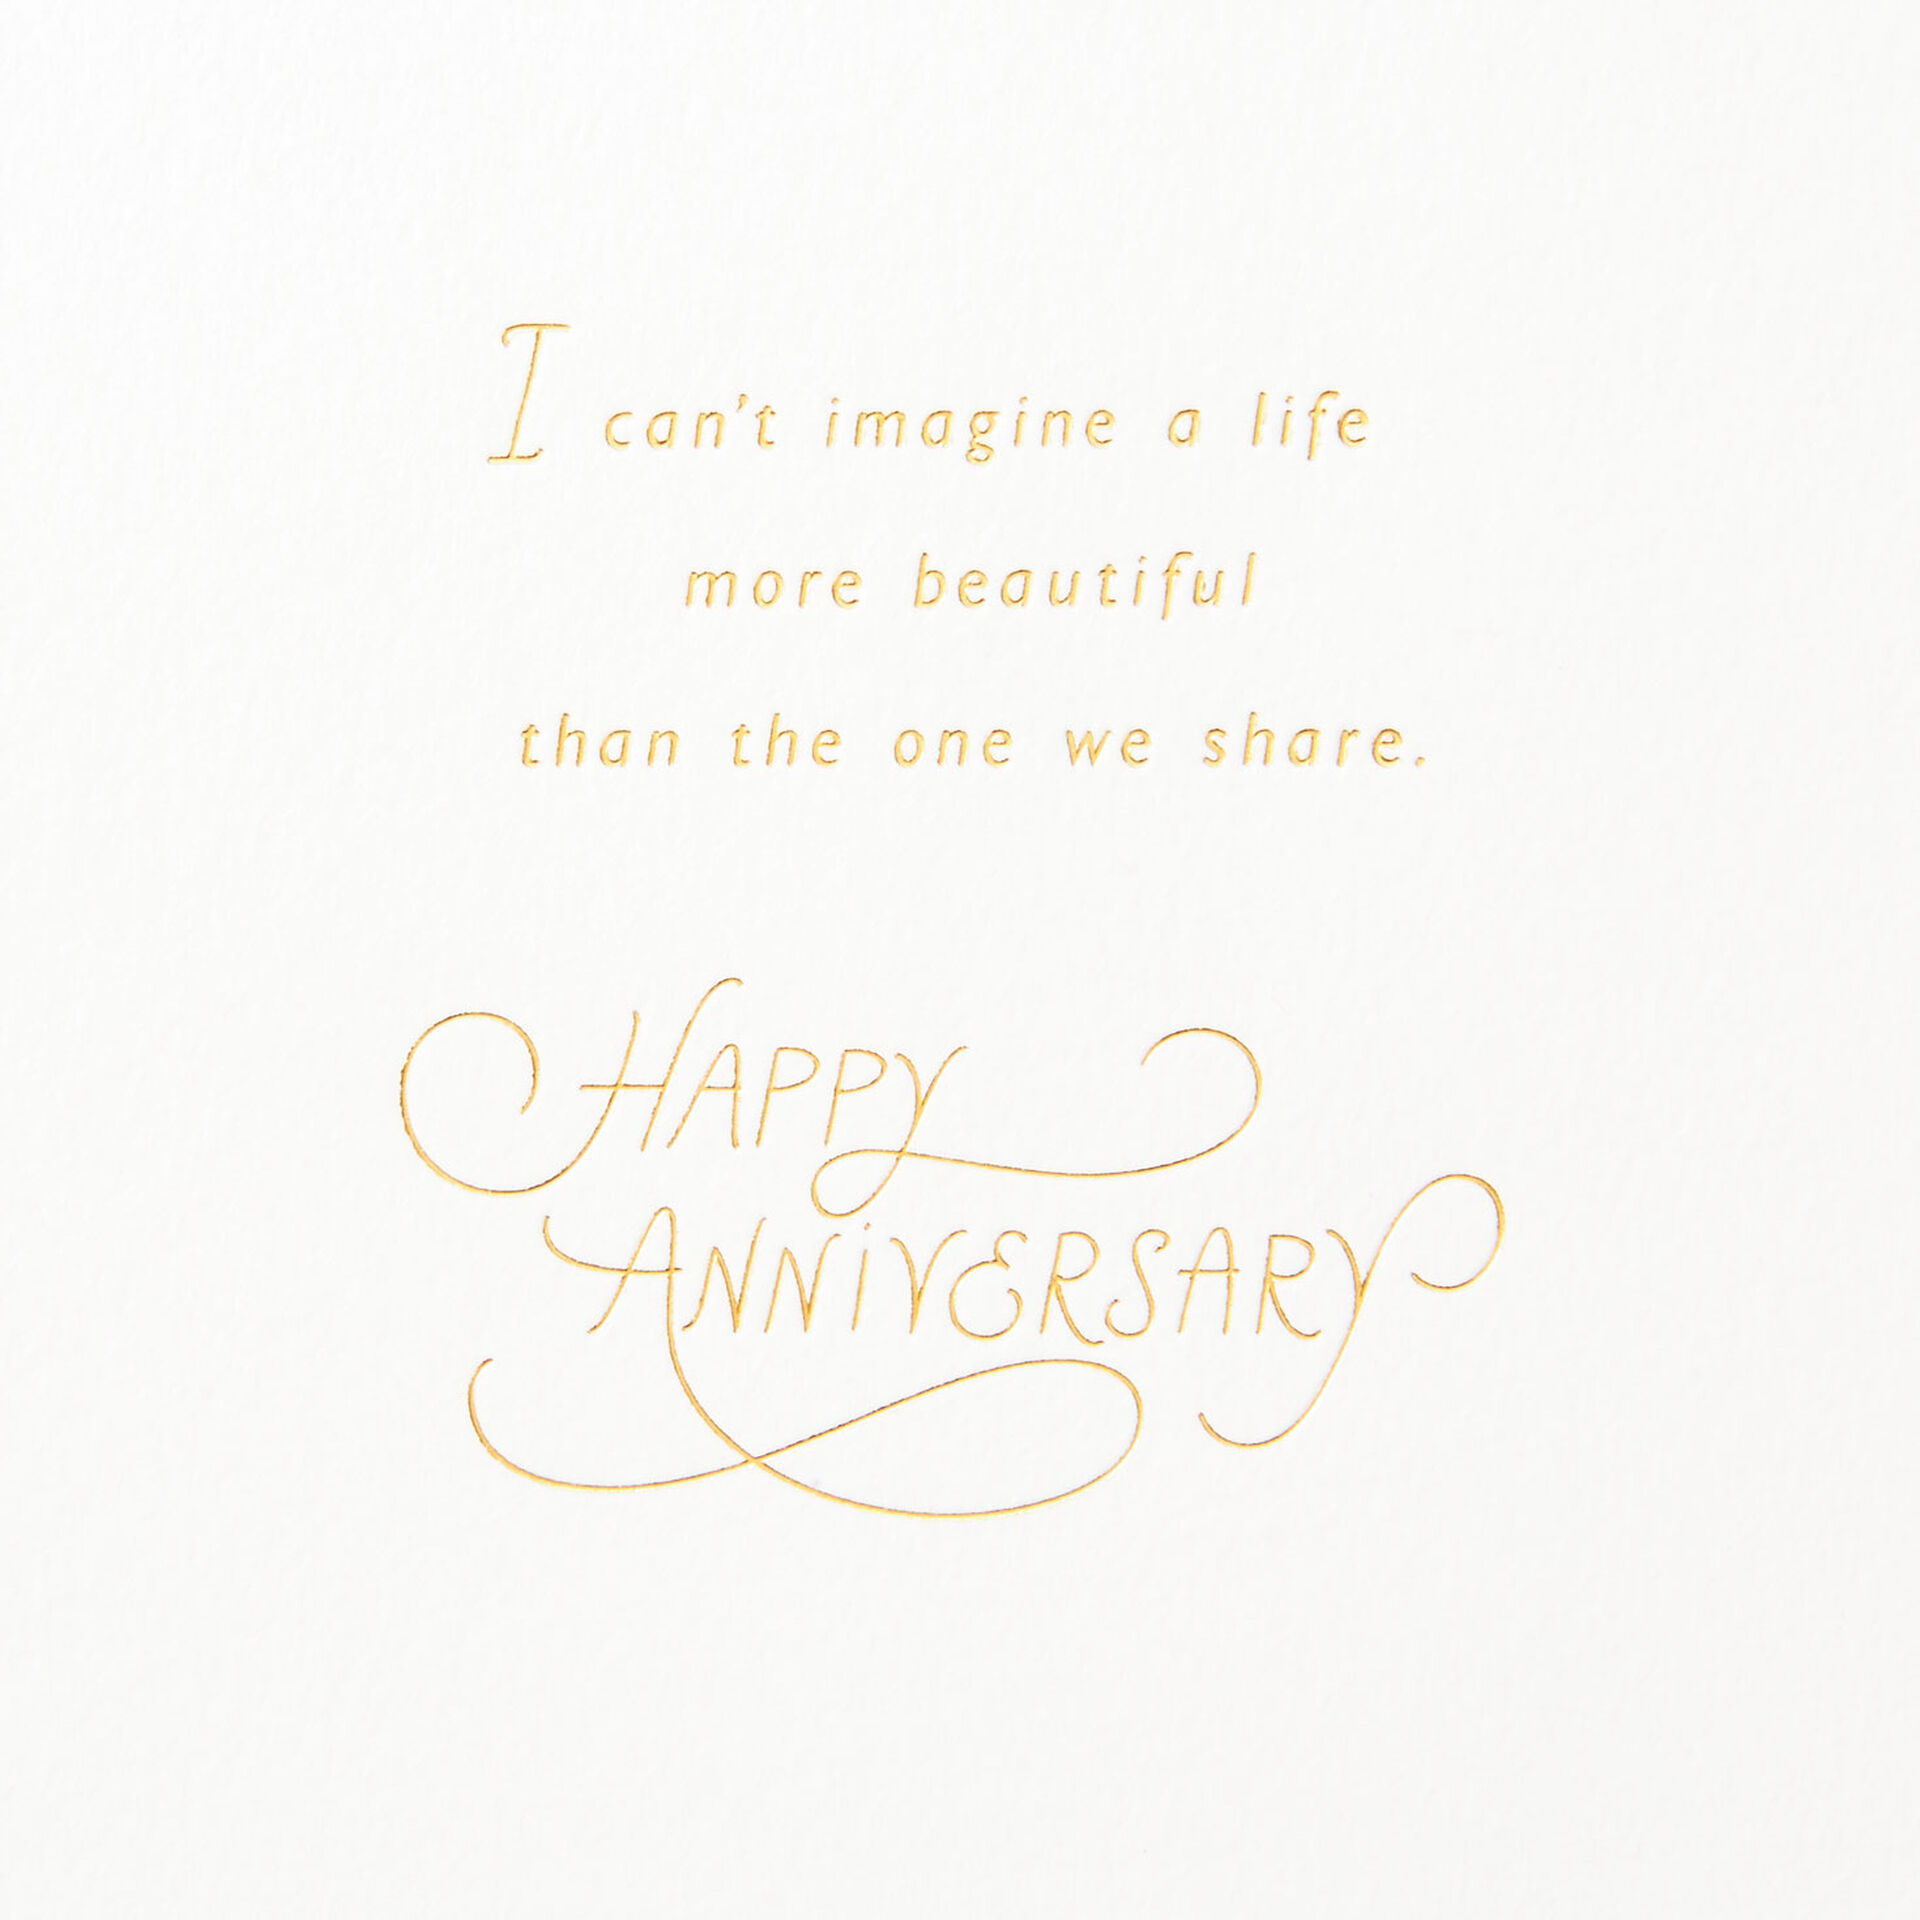 Floral-Wreath-Love-You-Anniversary-Card_799LAD9381_02